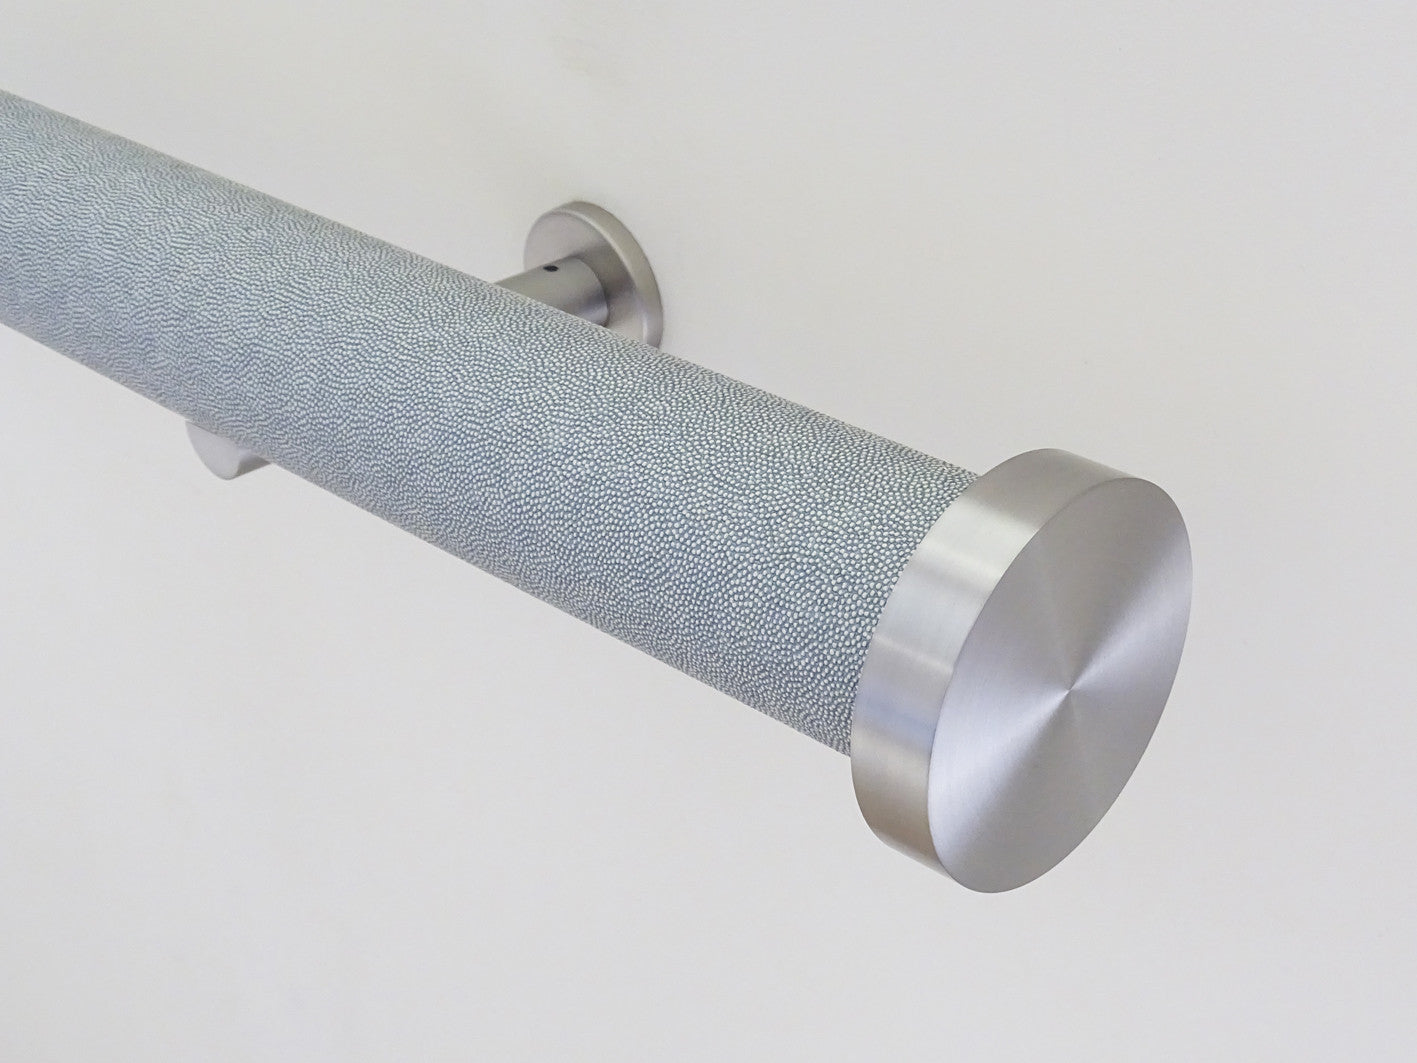 50mm Stainless steel mini disc finial on moonlight wrapped curtain pole